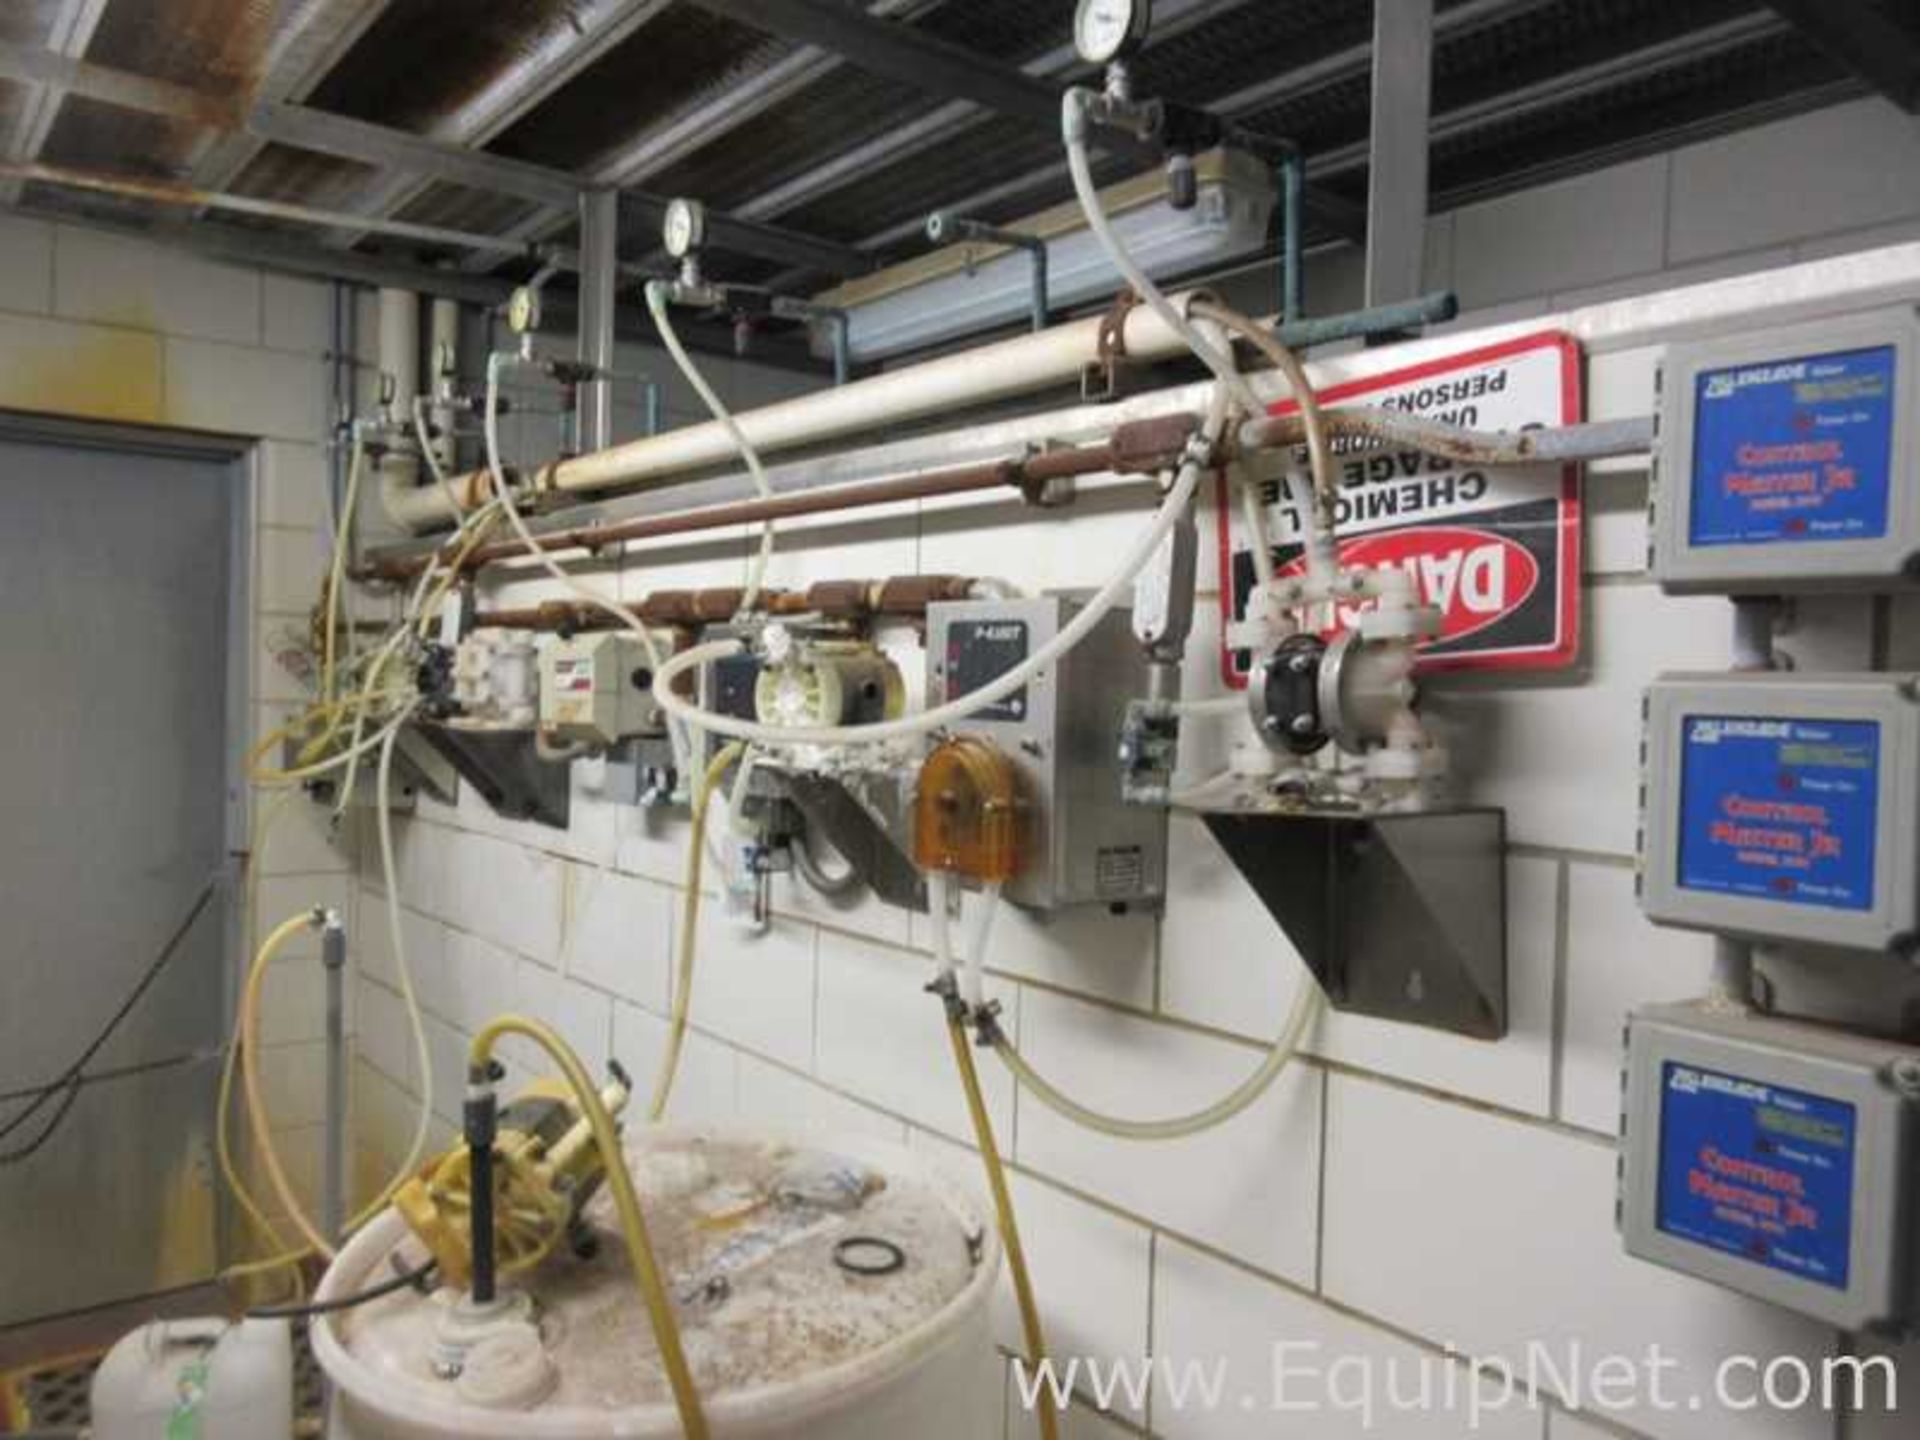 EQUIPNET LISTING #775980; REMOVAL COST: $15,754.00; DESCRIPTION: CIP System With Three Tanks, - Image 14 of 17